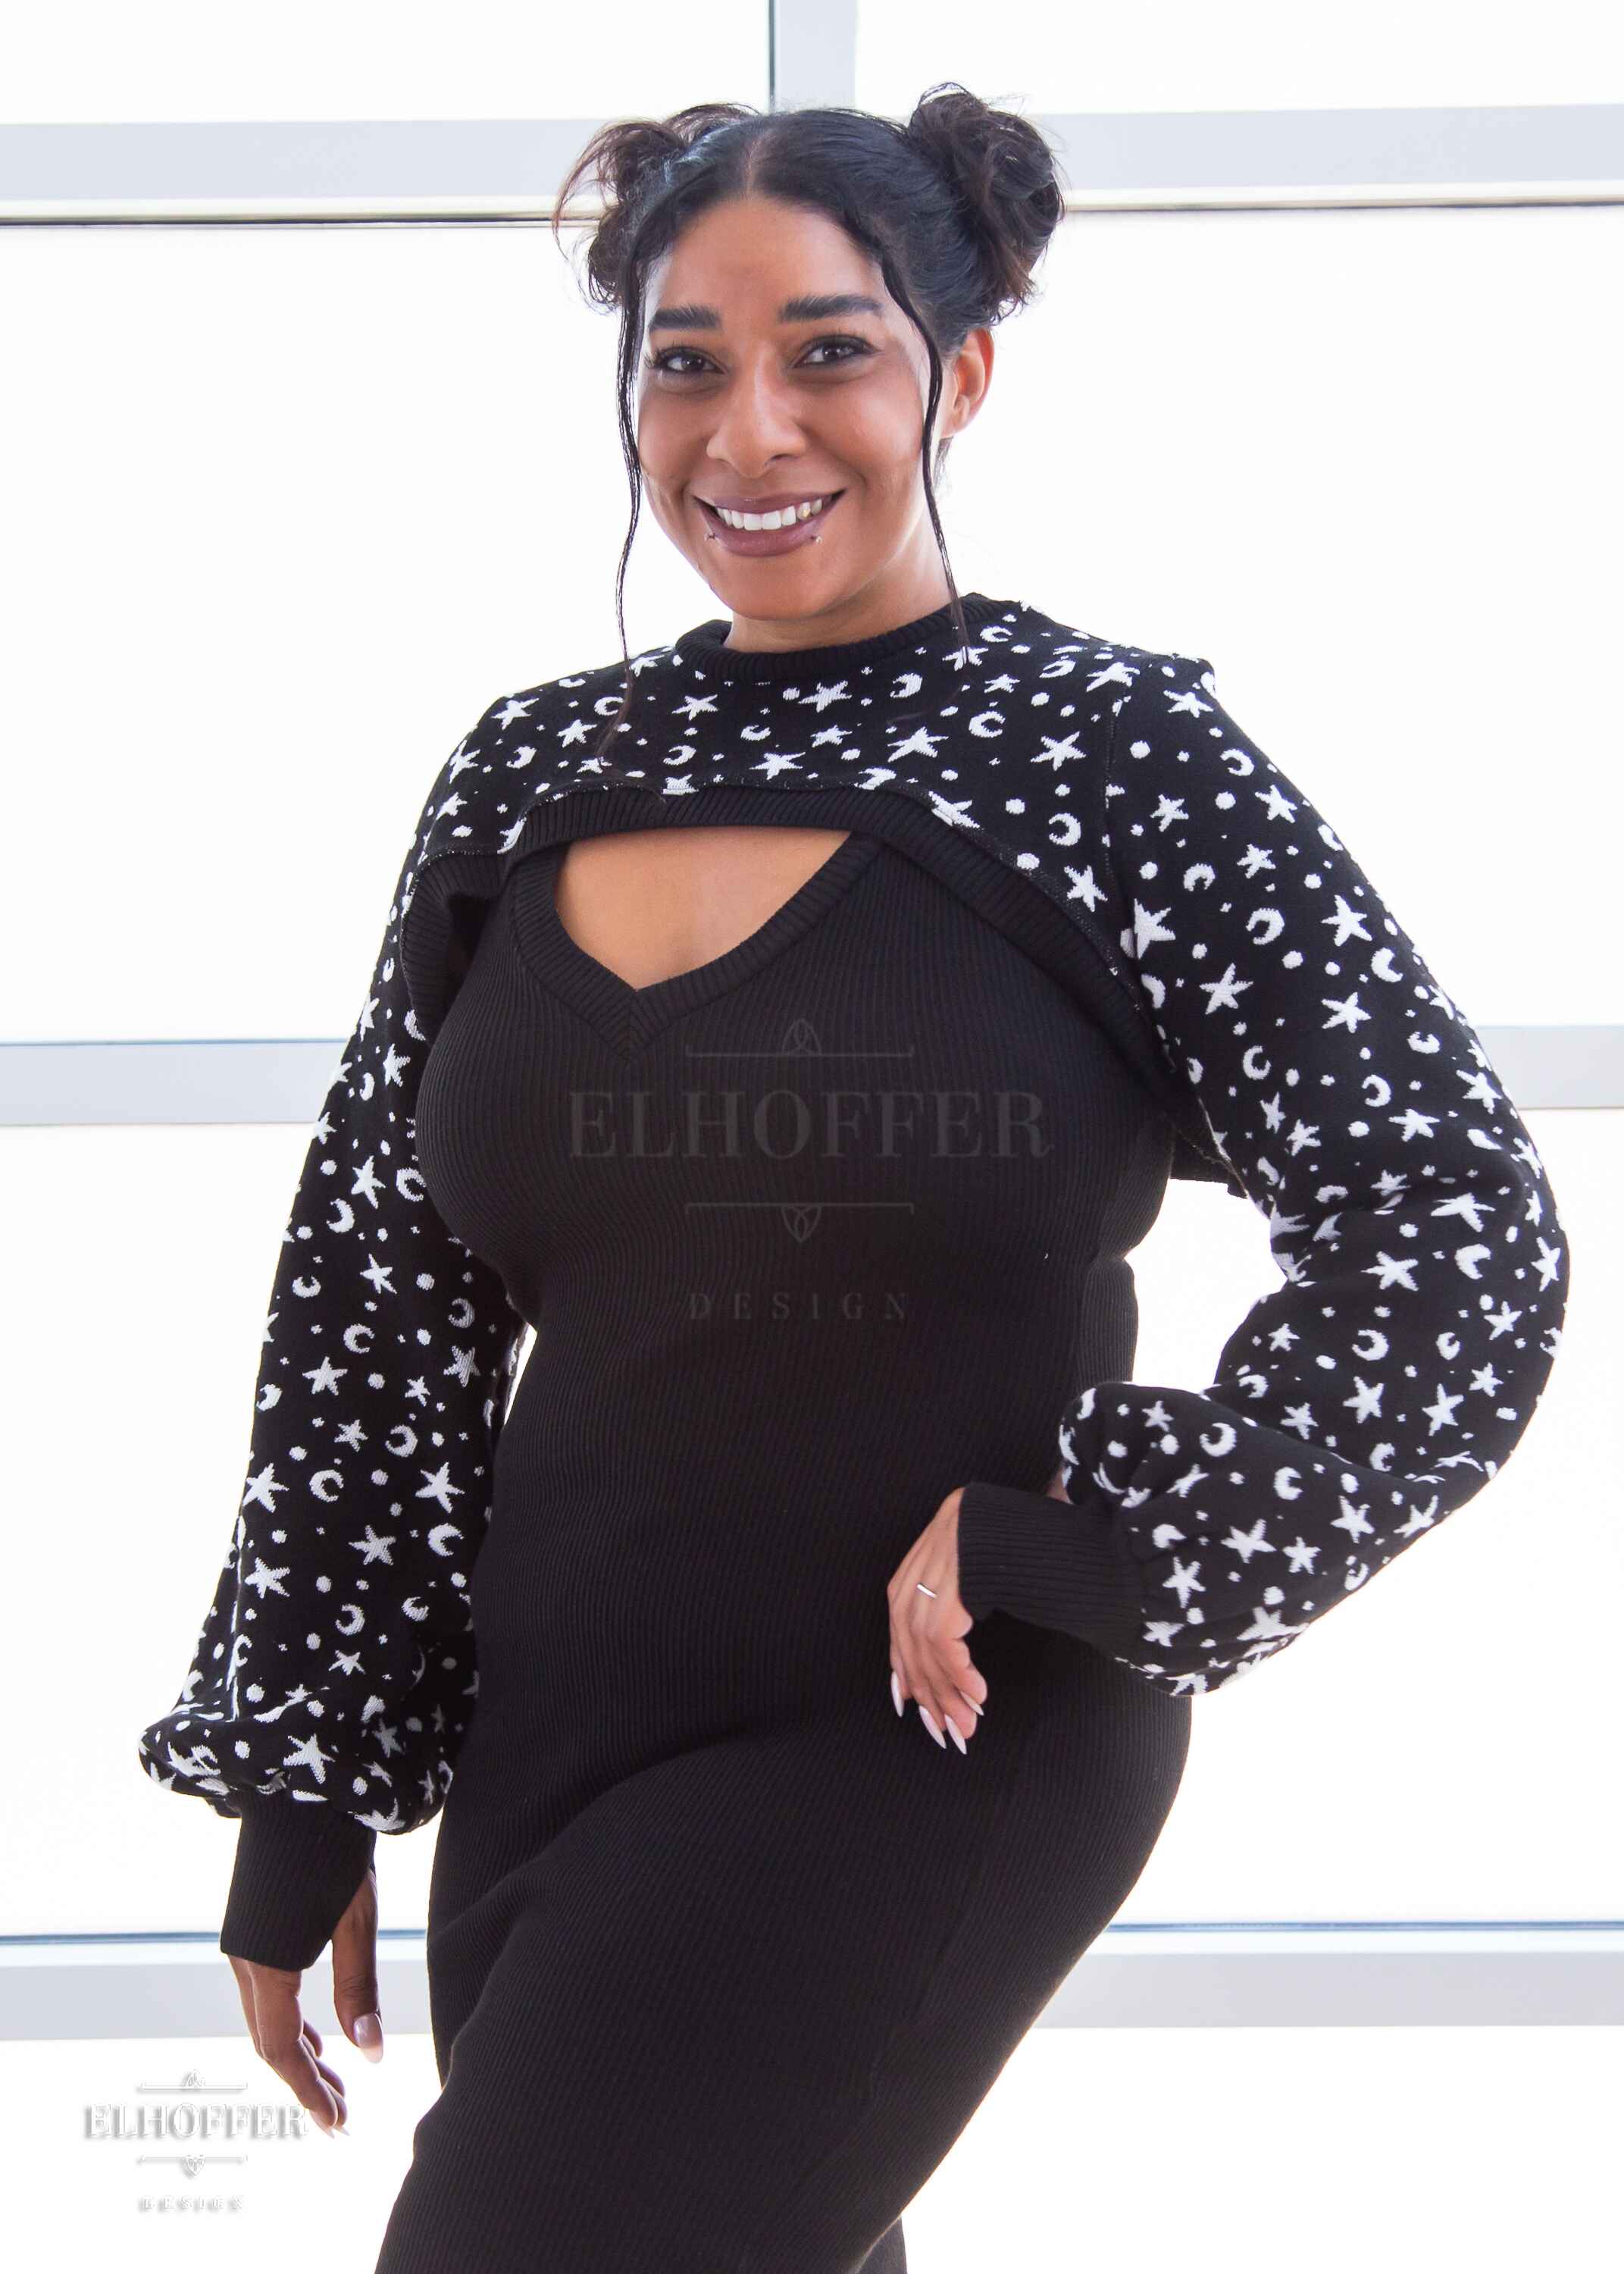 Janae, a light brown skinned L model with dark hair in space buns, is smiling while wearing a black super cropped crew neck knit shrug sweater with a white star and moon pattern, long billowing sleeves, and thumbholes.